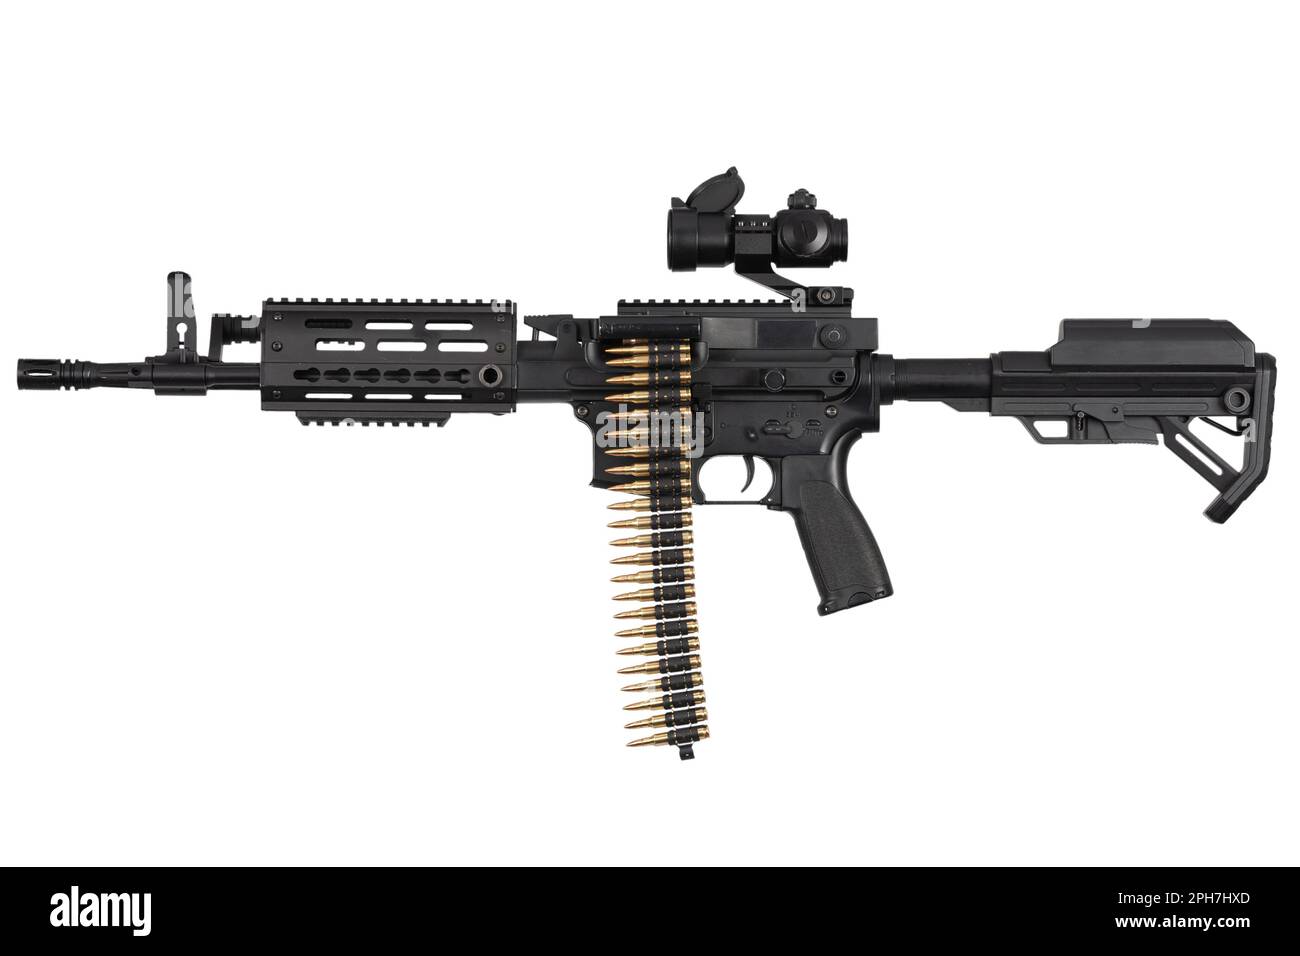 Carbine with belt-fed upper receiver that convert AR-15 or M16 from a standard, magazine rifle to light machine gun. Isolated on a white background Stock Photo